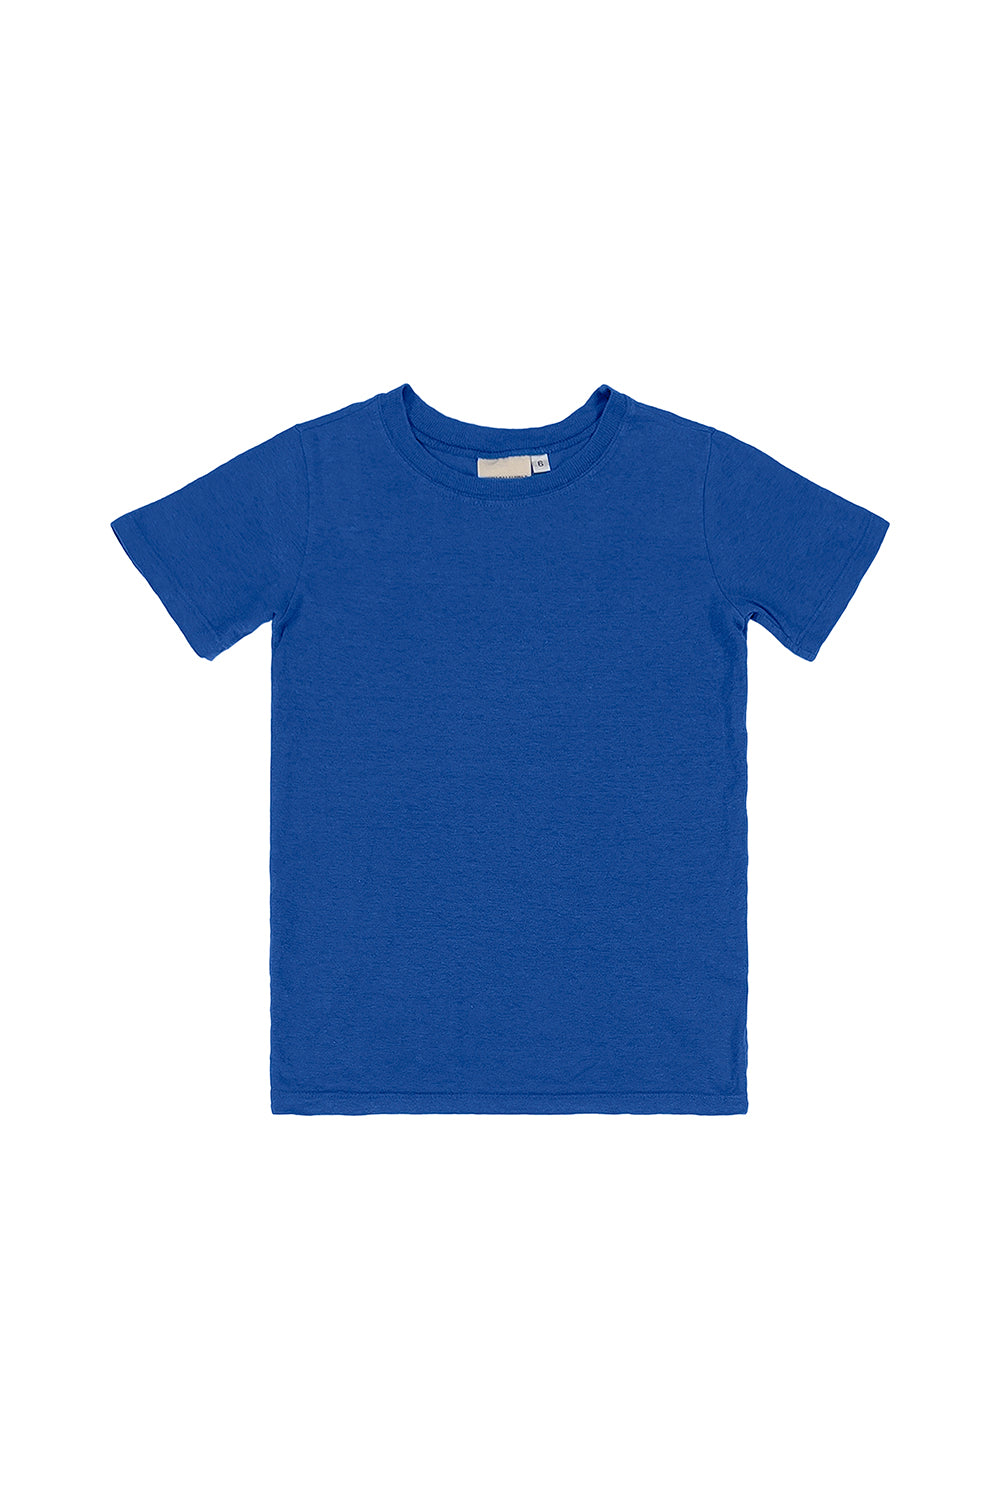 Grom Tee | Jungmaven Hemp Clothing & Accessories / Color: Galaxy Blue